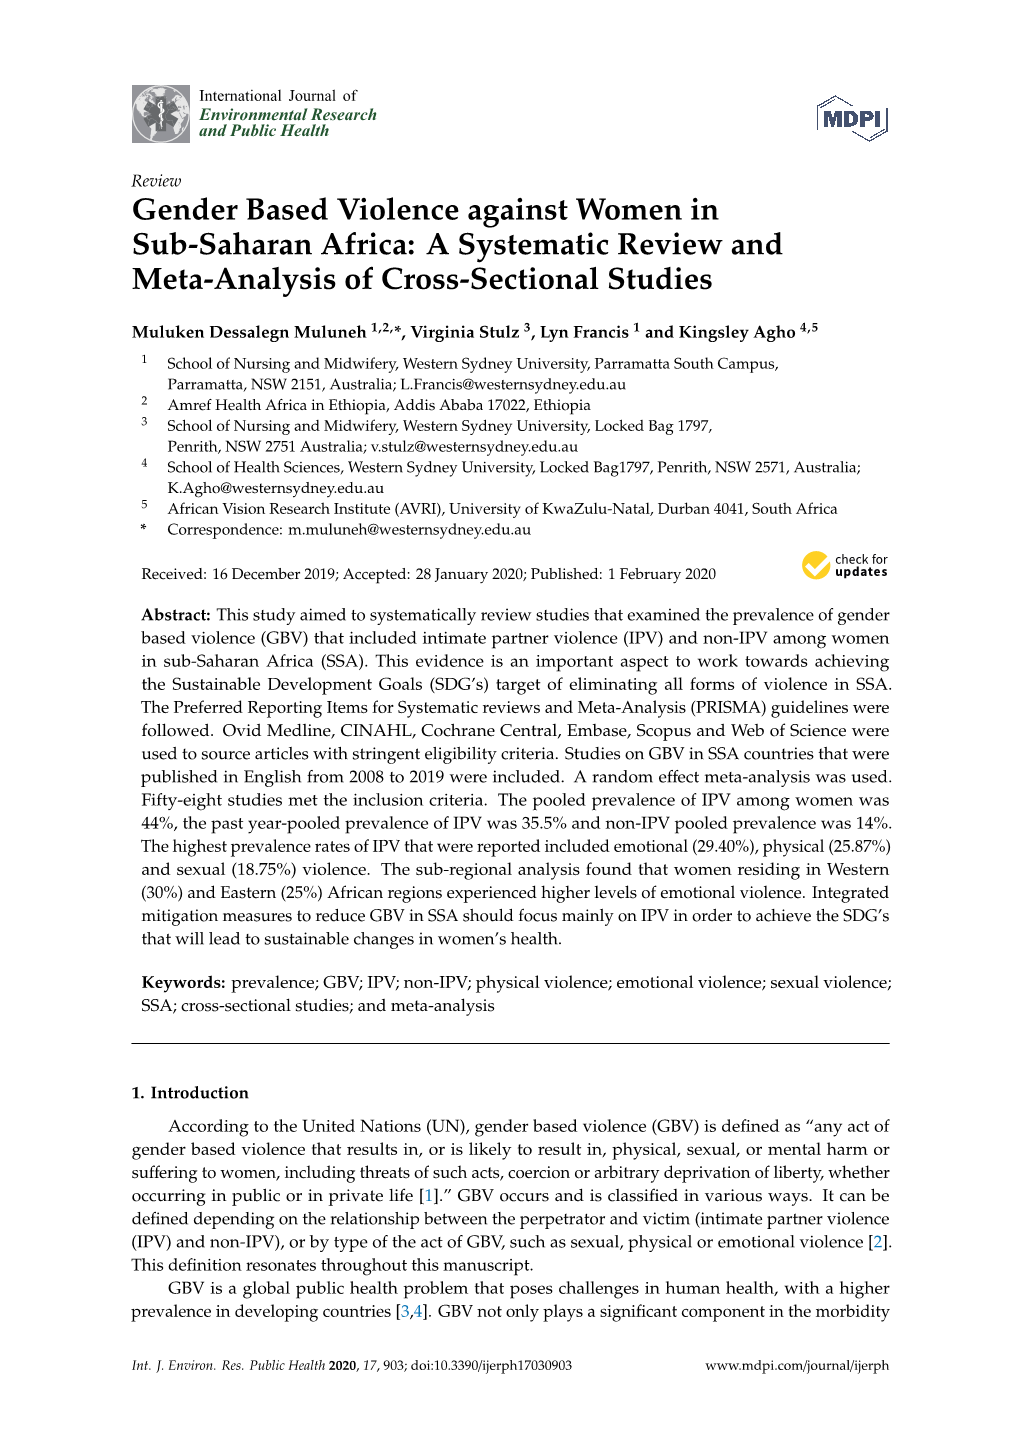 Gender Based Violence Against Women in Sub-Saharan Africa: a Systematic Review and Meta-Analysis of Cross-Sectional Studies